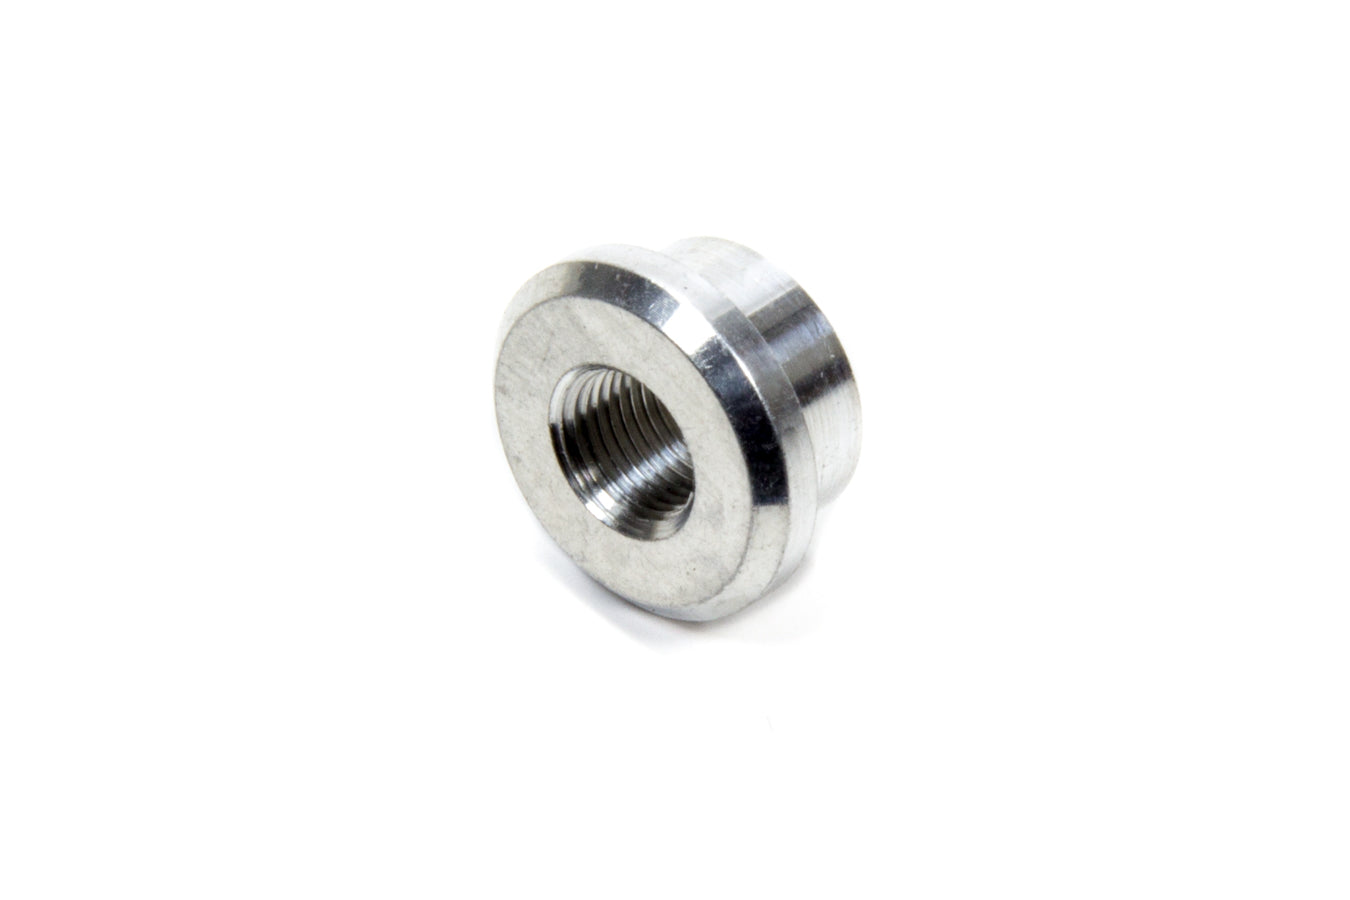 Bung - 1/8 in NPT Female - Weld-On - Recessed Flange - Aluminum - Natural - Each